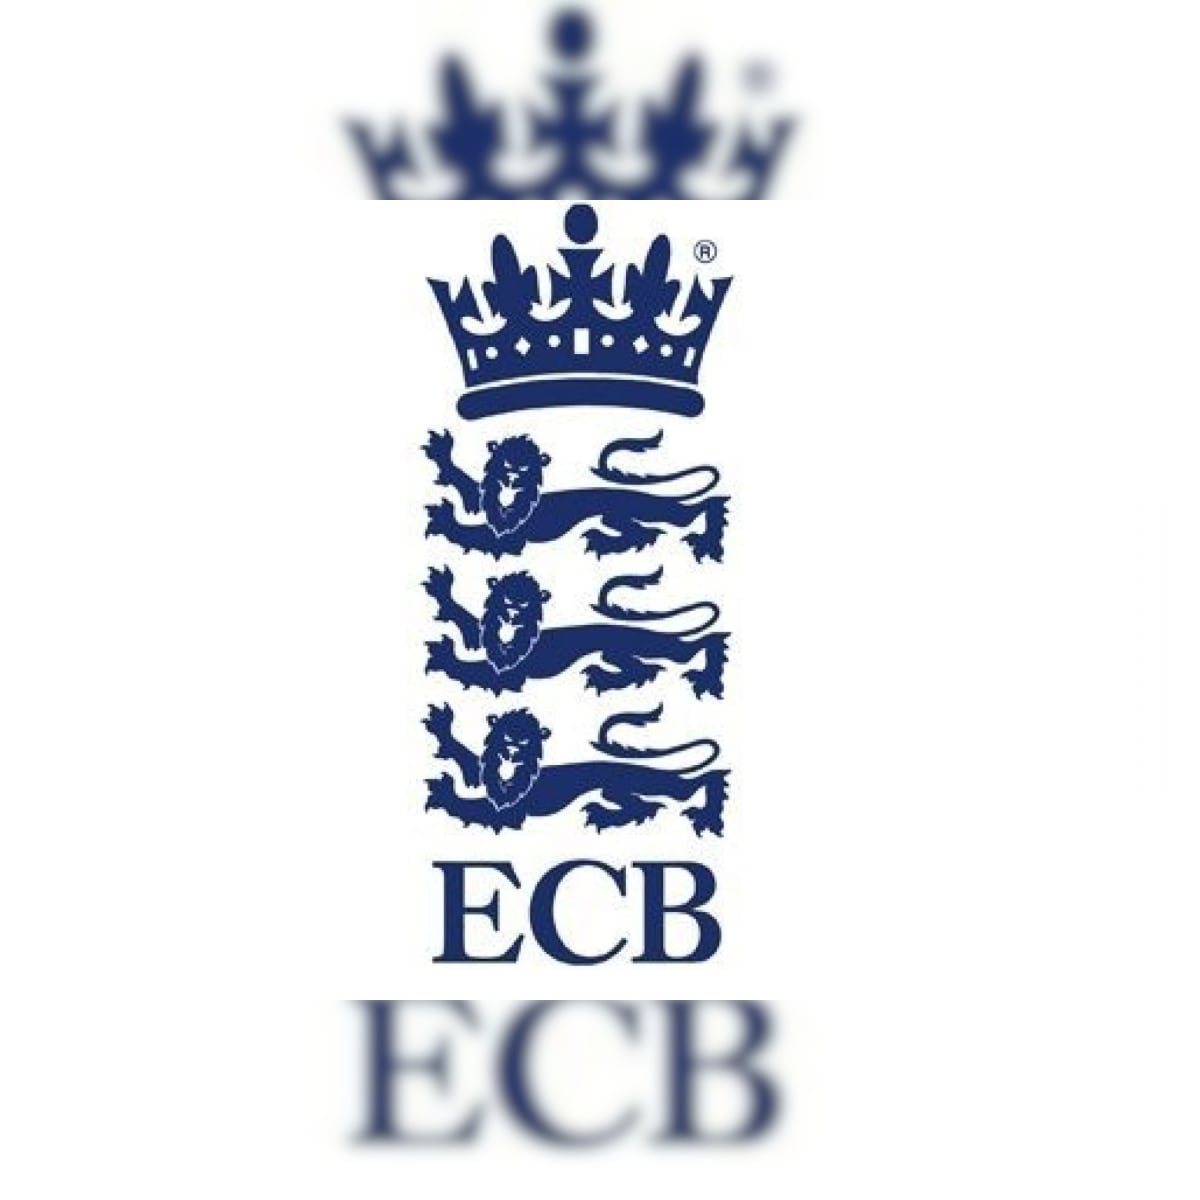 Fake Ecb Press Release Claiming Change In India Vs England 2021 Test Series Schedule Goes Viral